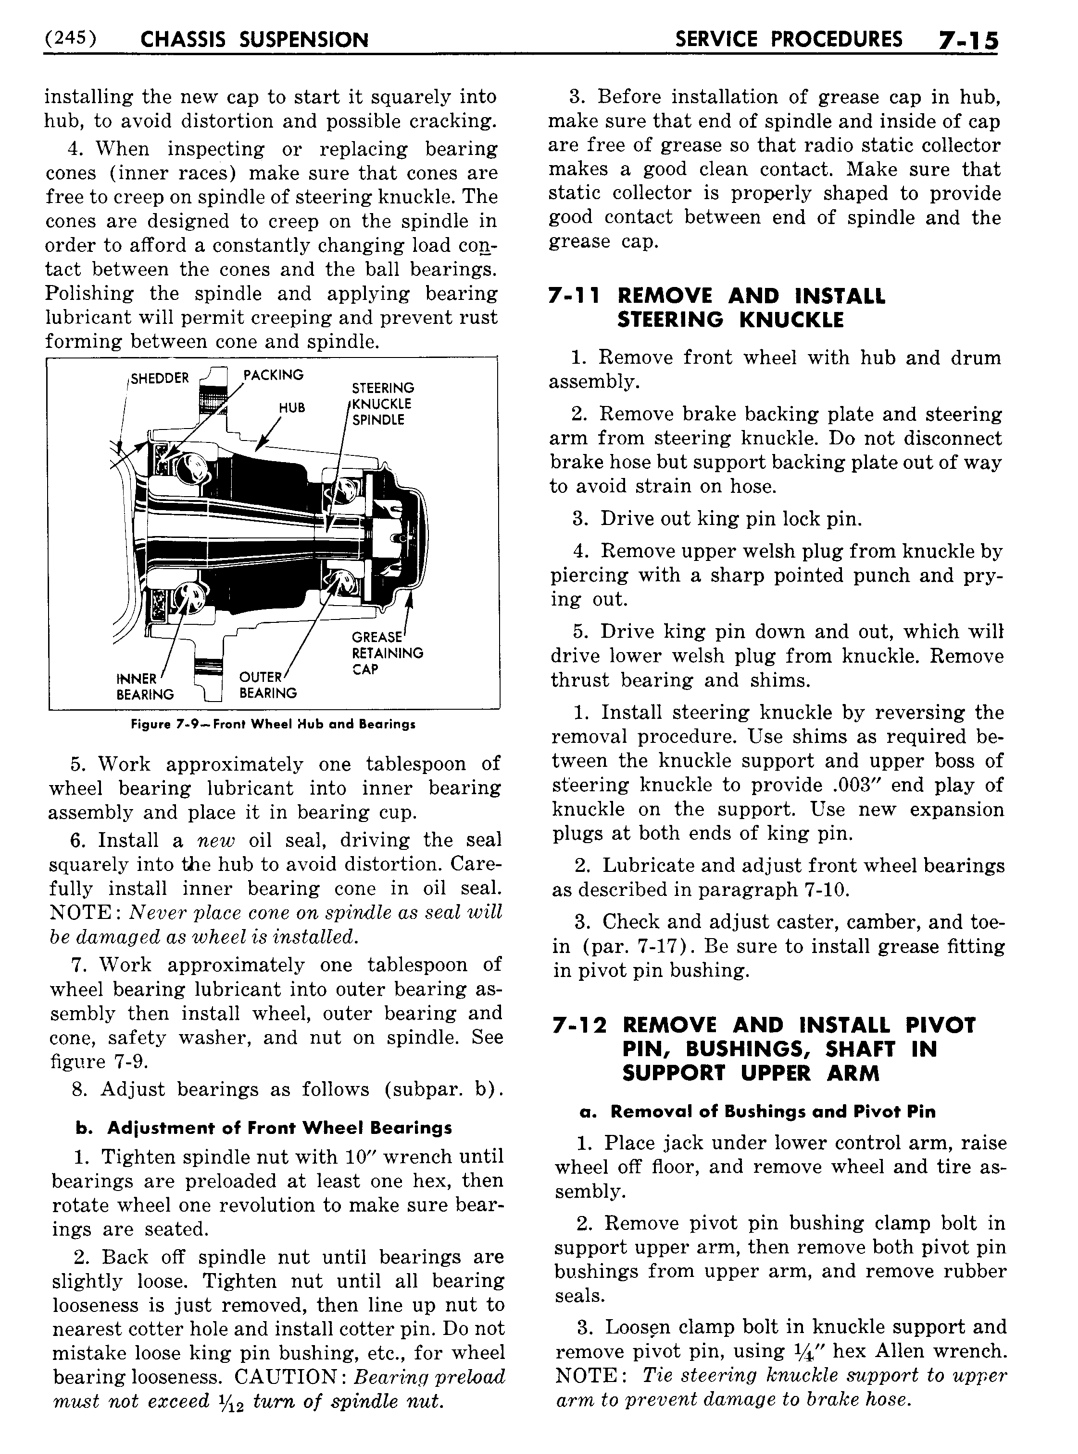 n_08 1954 Buick Shop Manual - Chassis Suspension-015-015.jpg